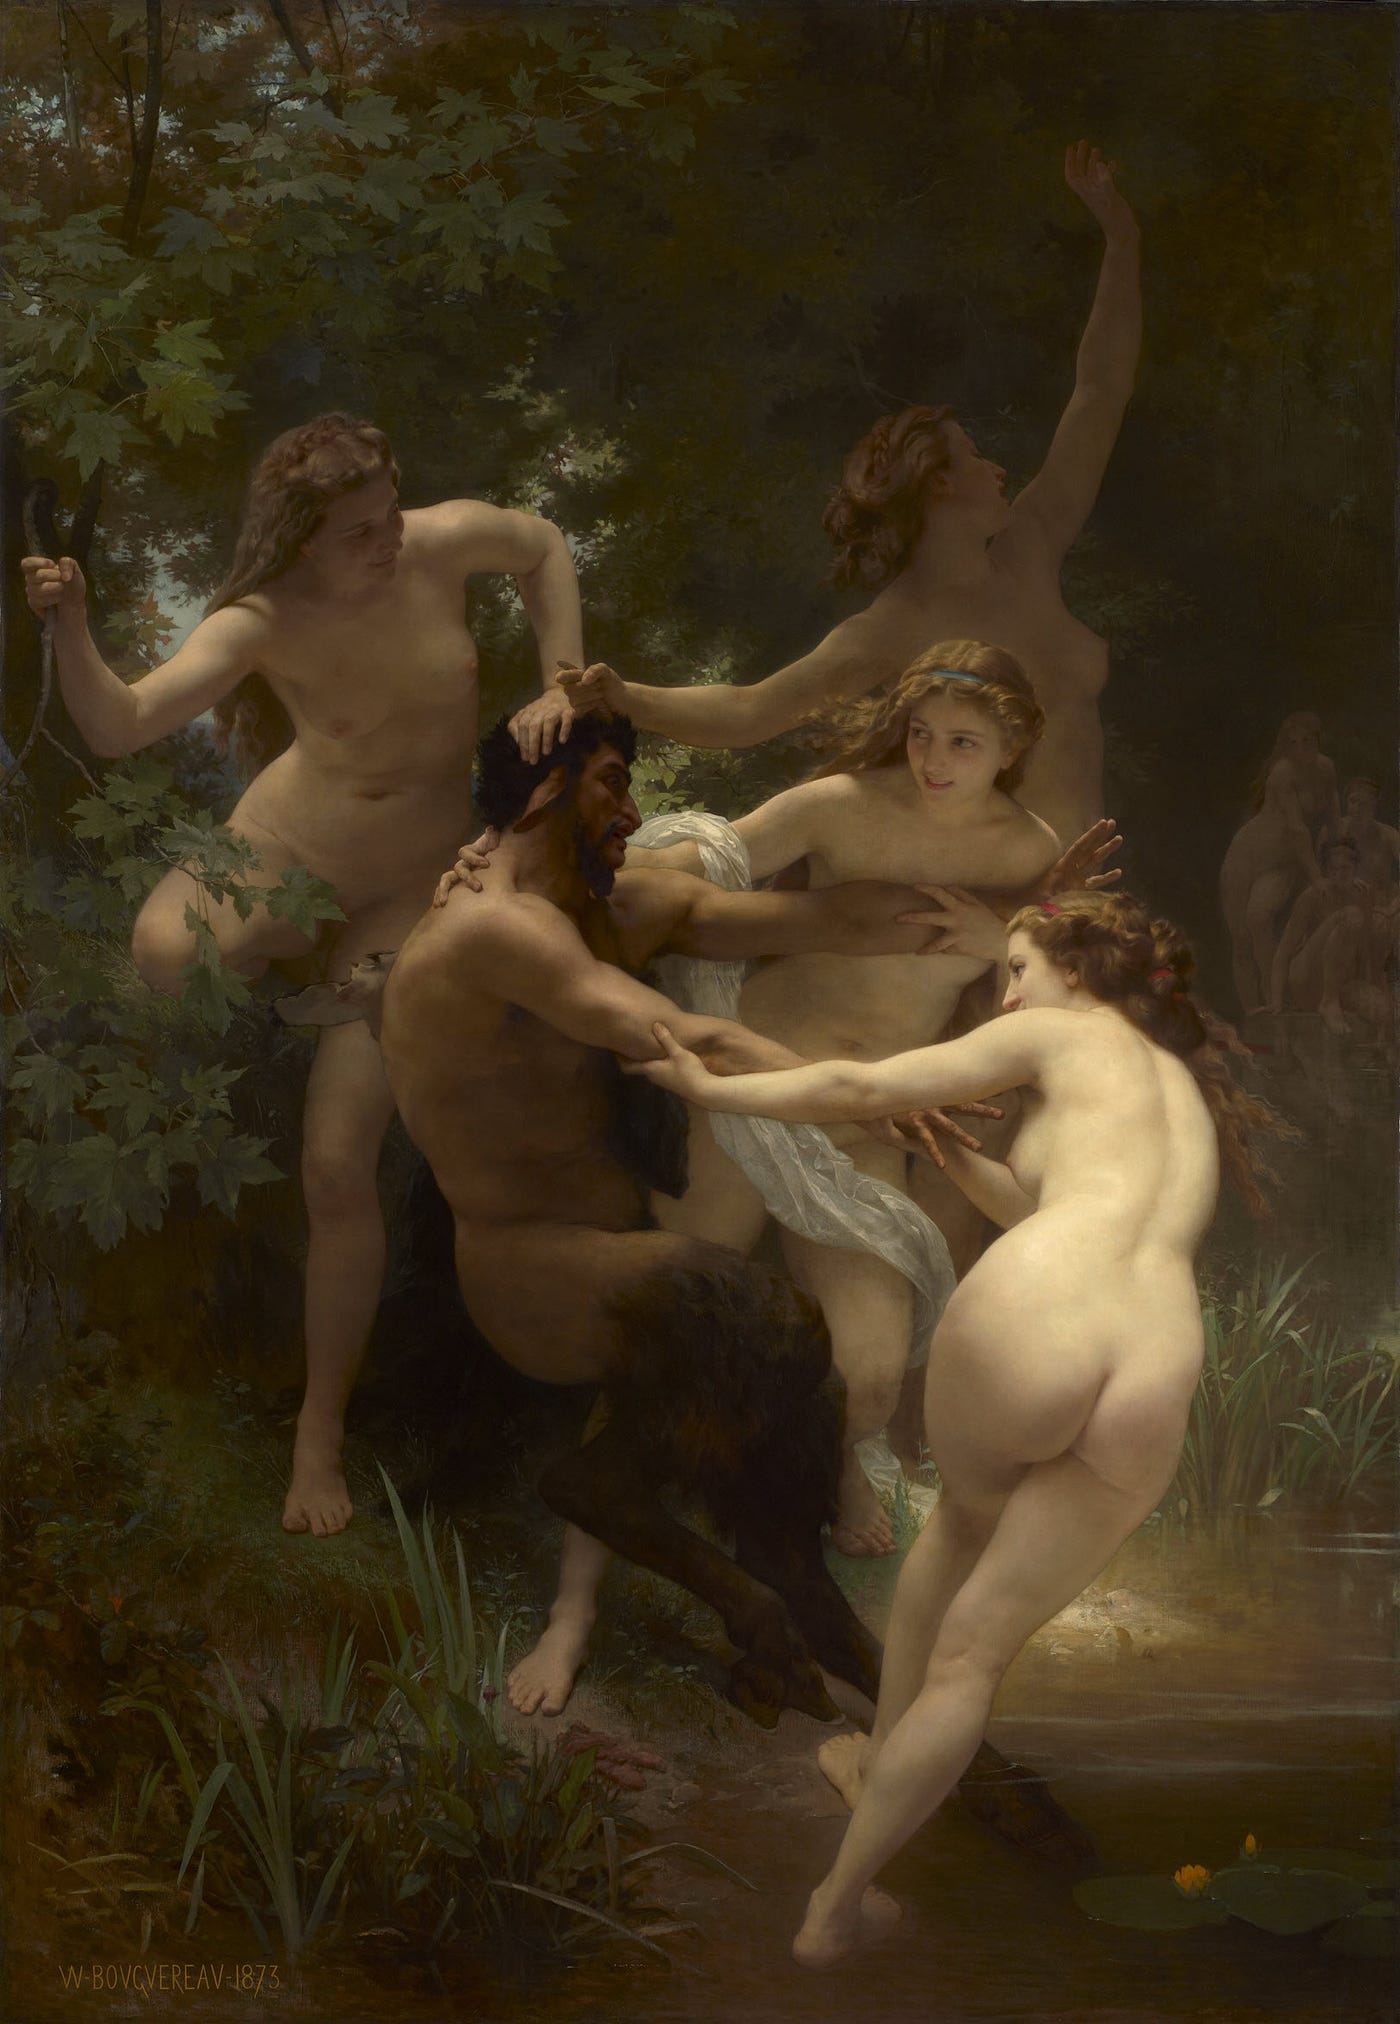 The Nymphs and Satyrs of William-Adolphe Bouguereau by Remy Dean Signifier Medium image photo